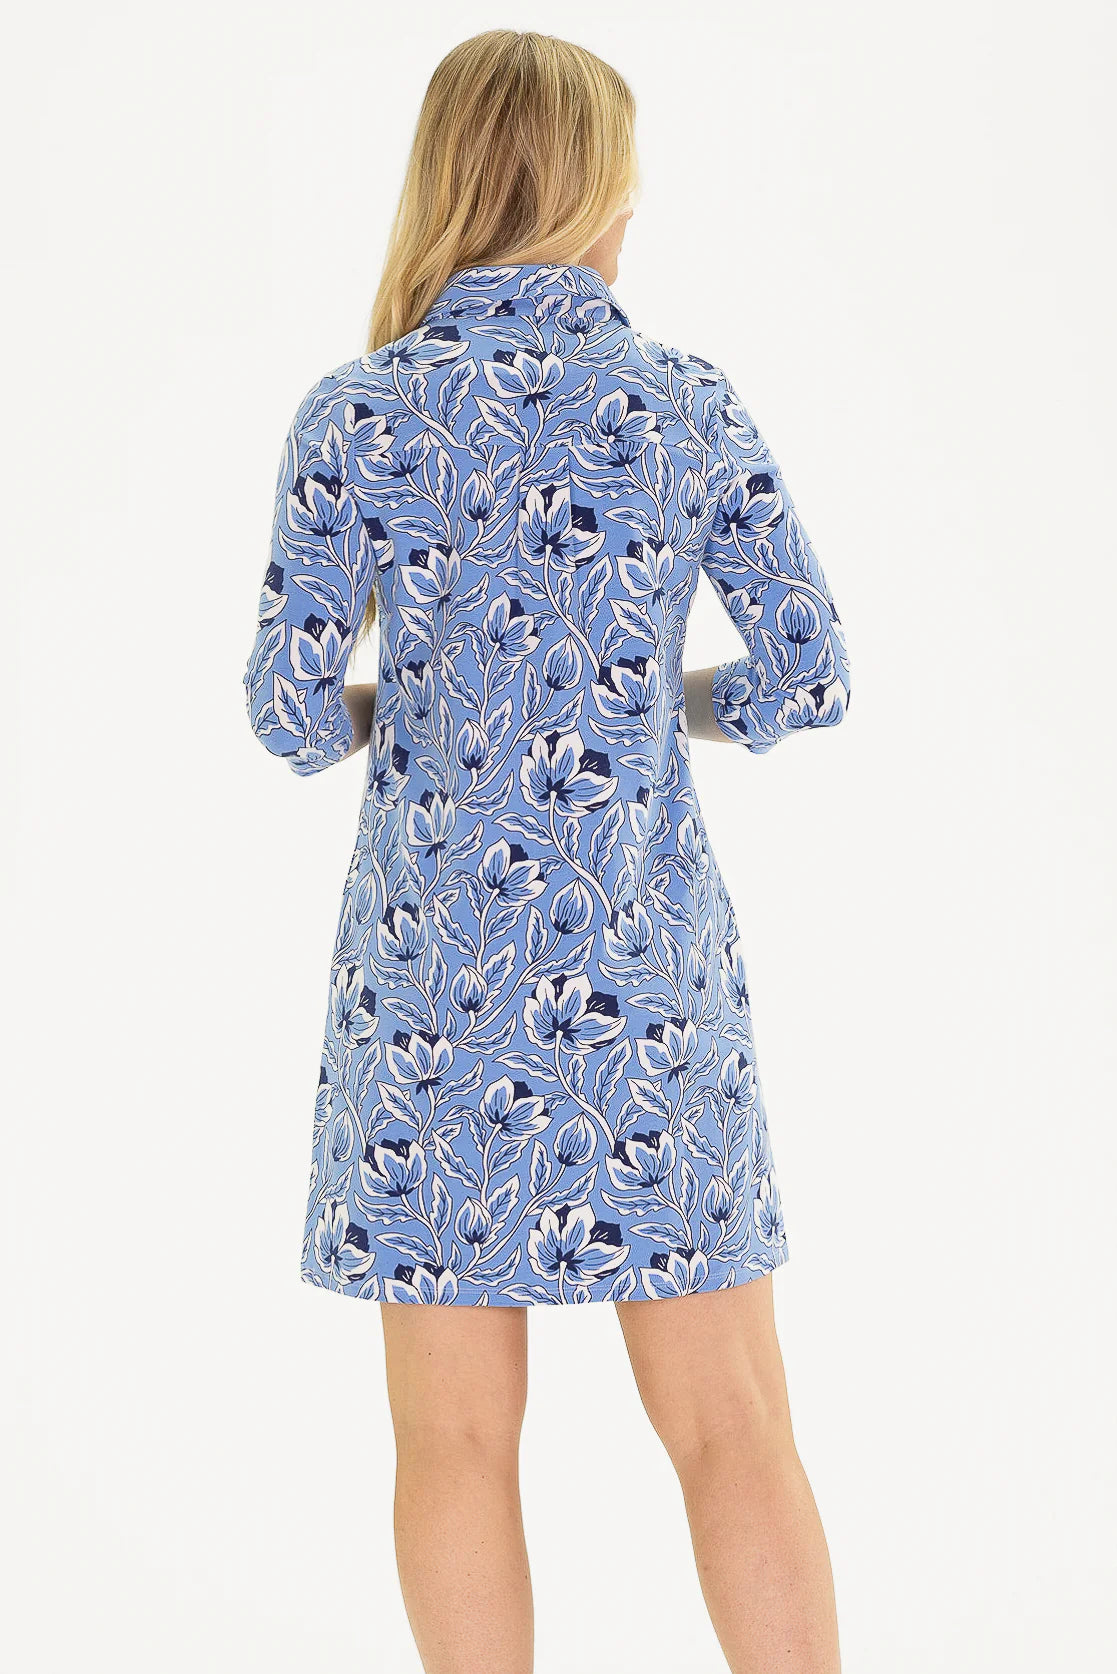 Coco Blue Blossom Dress by Duffield Lane